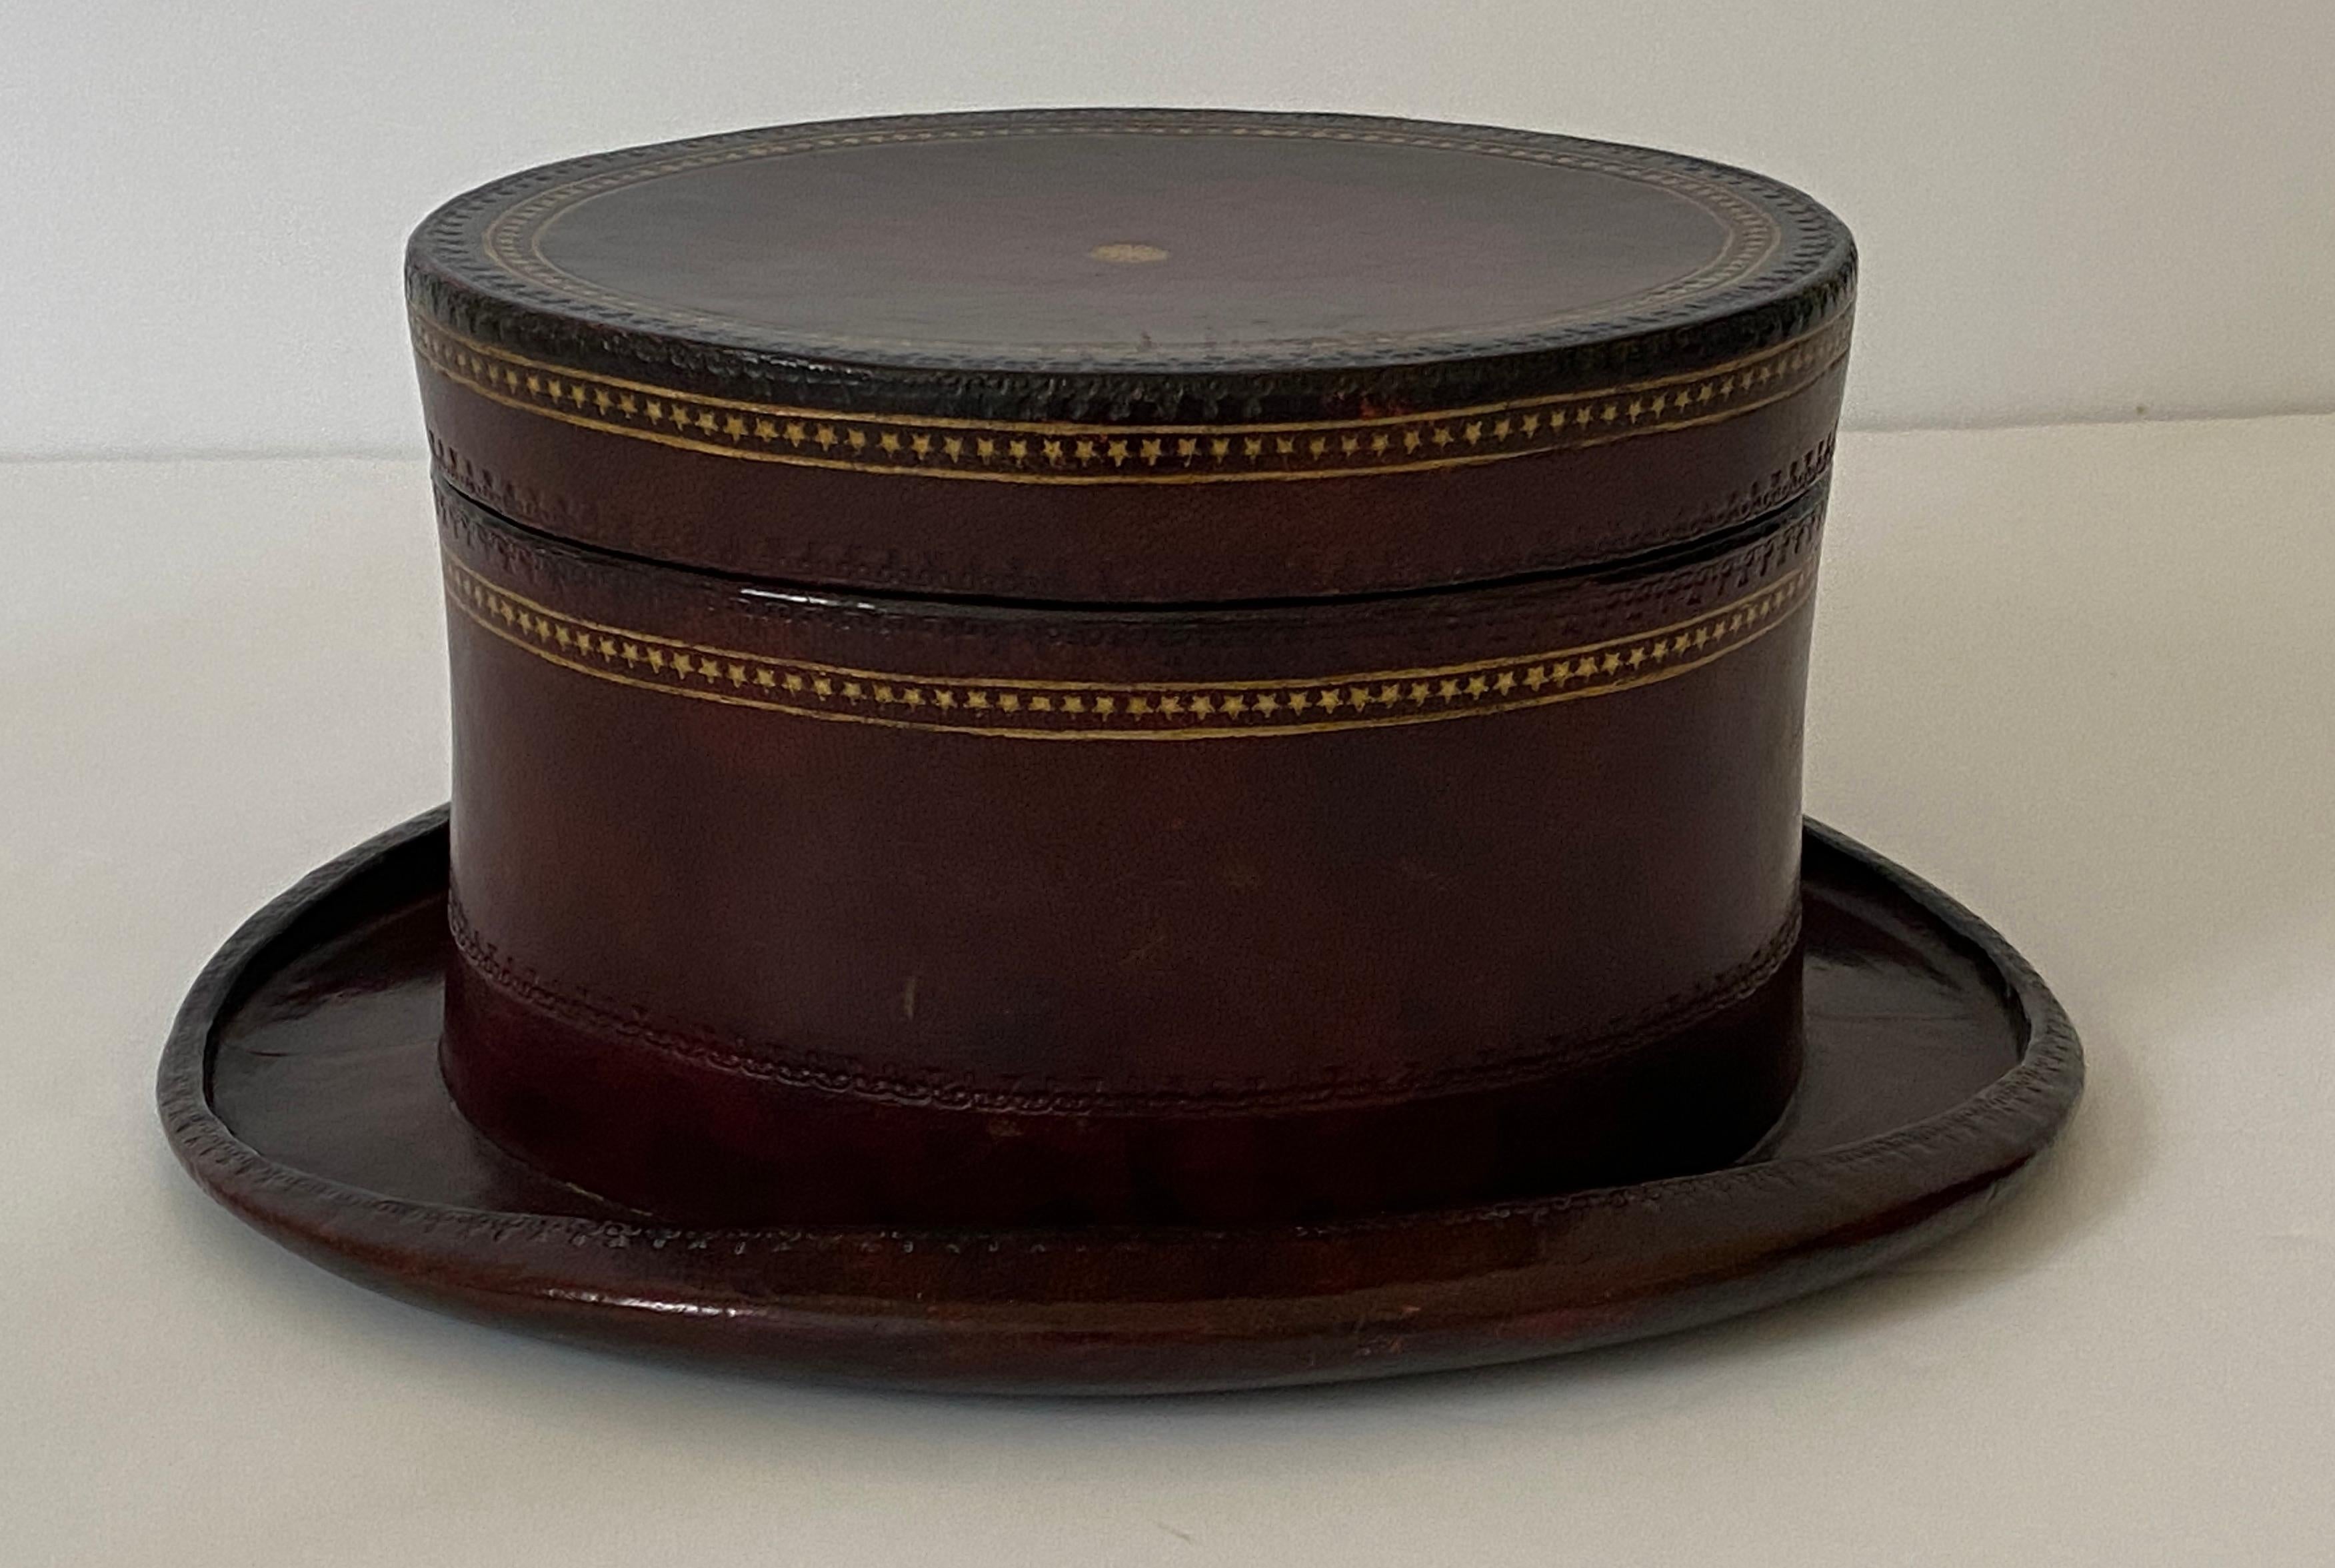 This stylish, whimsical and chic storage box dates to the 1980s and was created by Maitland Smith. The deep cordovan leather is highlighted with hand tooled, gilt gold edging.